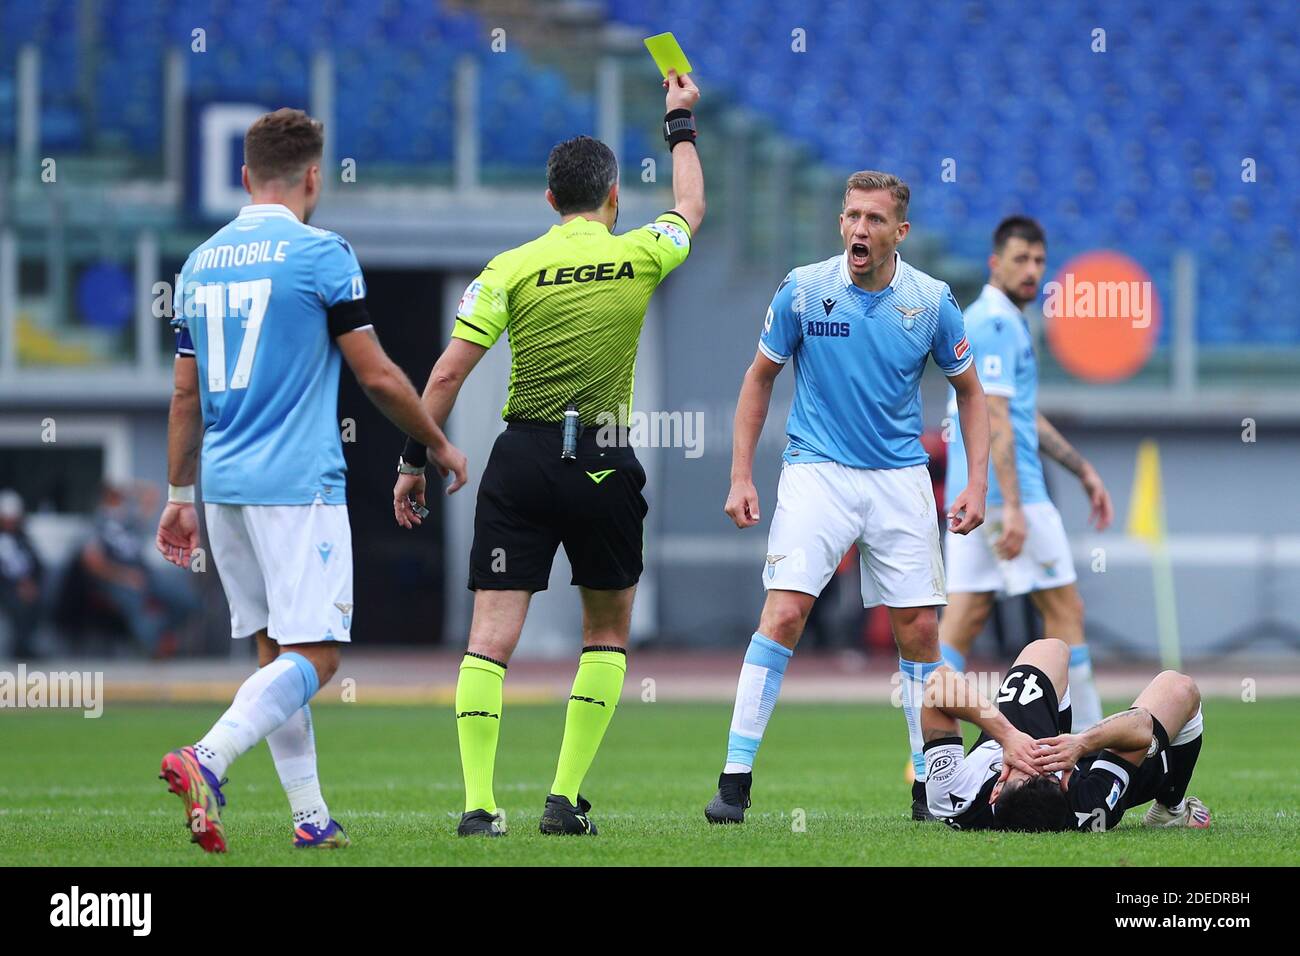 The referee Gianluca Aureliano shows yellow card to Lucas Leiva of Lazio (R), who reacts during the Italian championship Se / LM Stock Photo